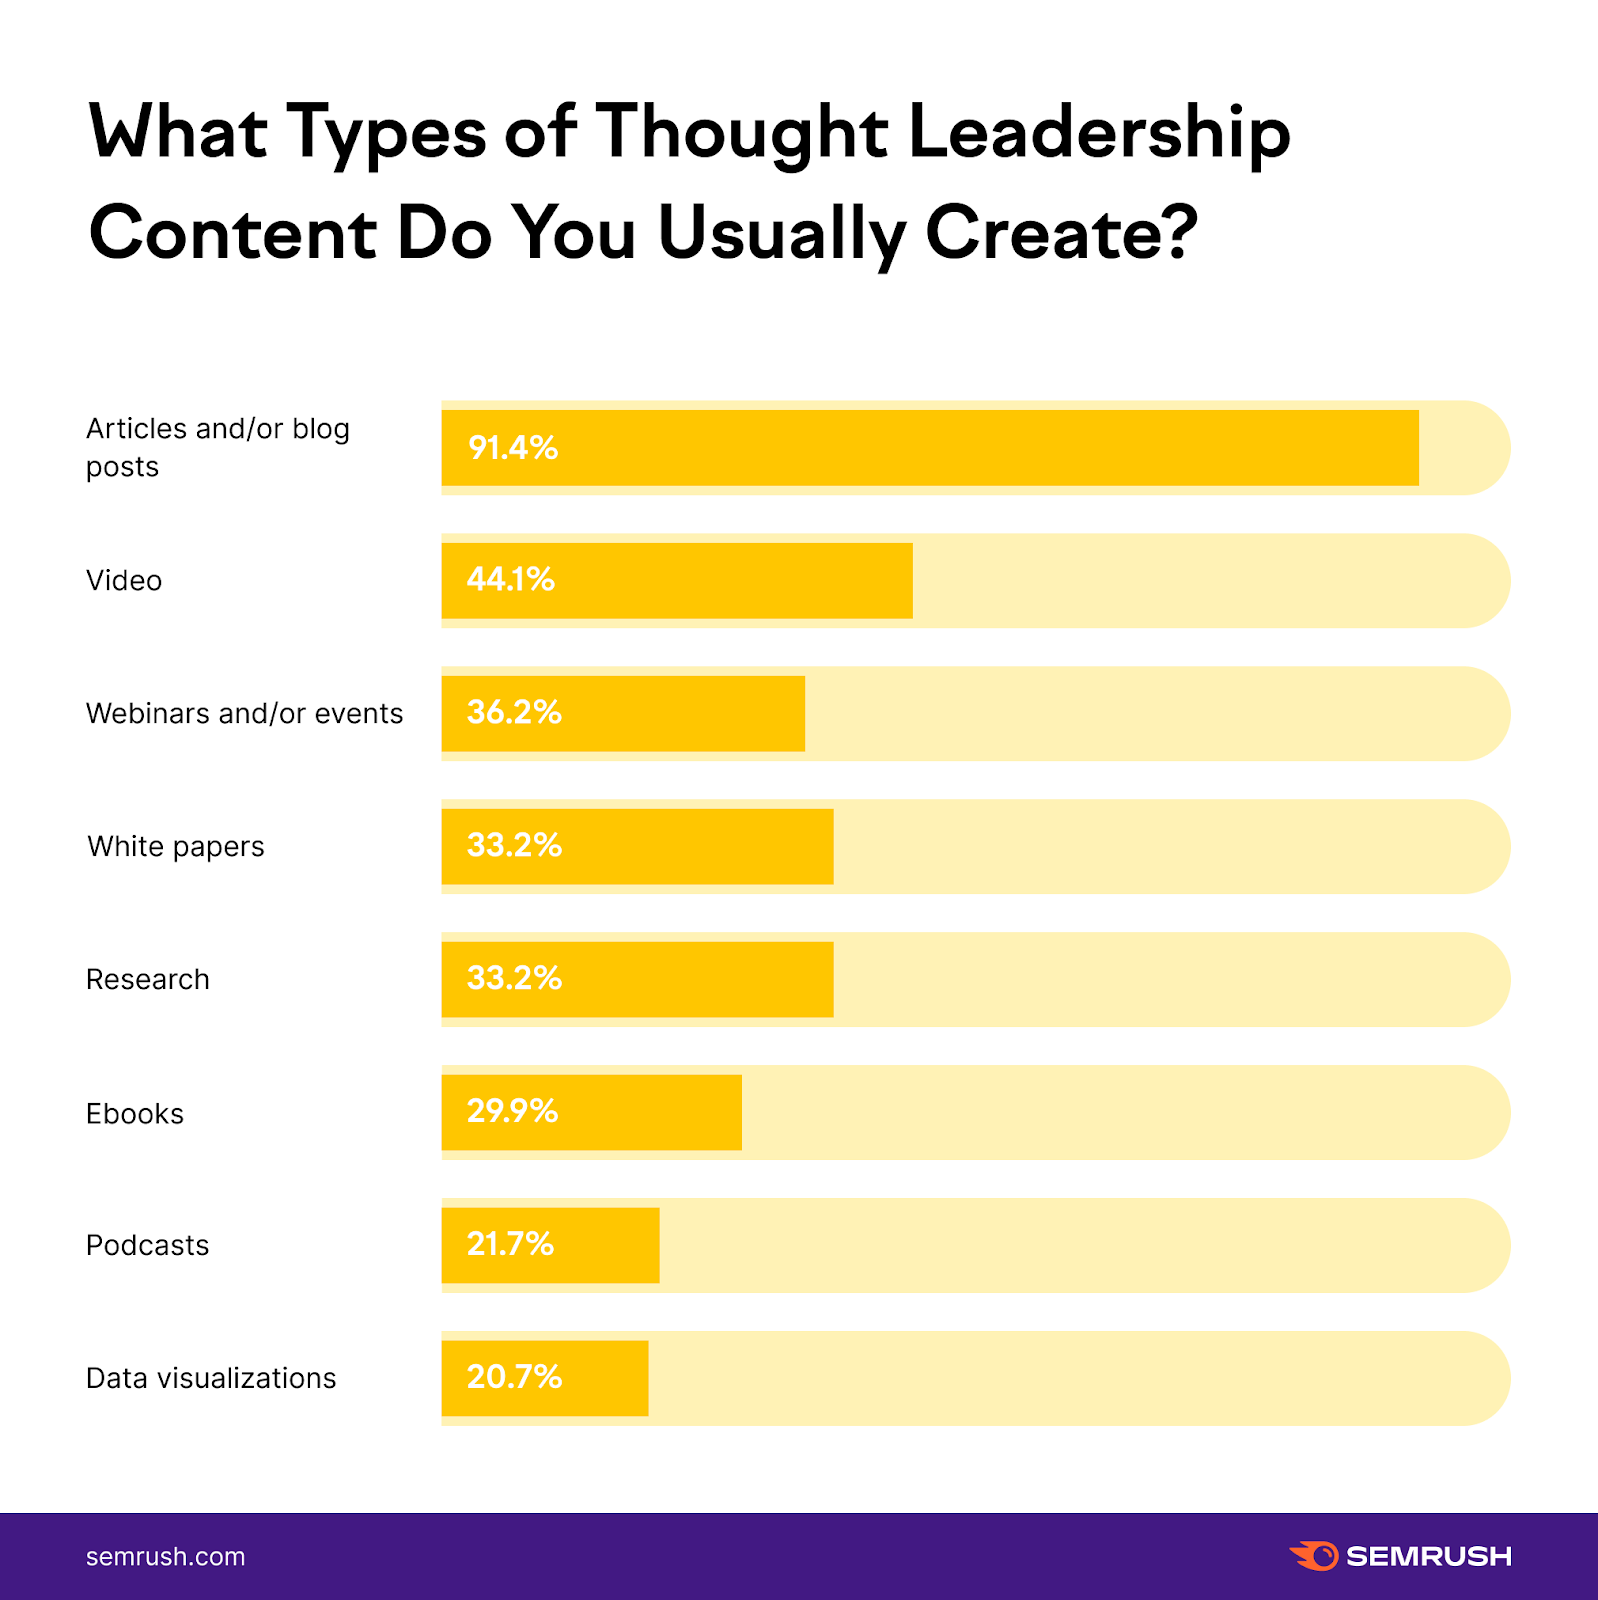 Thought Leadership content writing is an important marketing strategy.